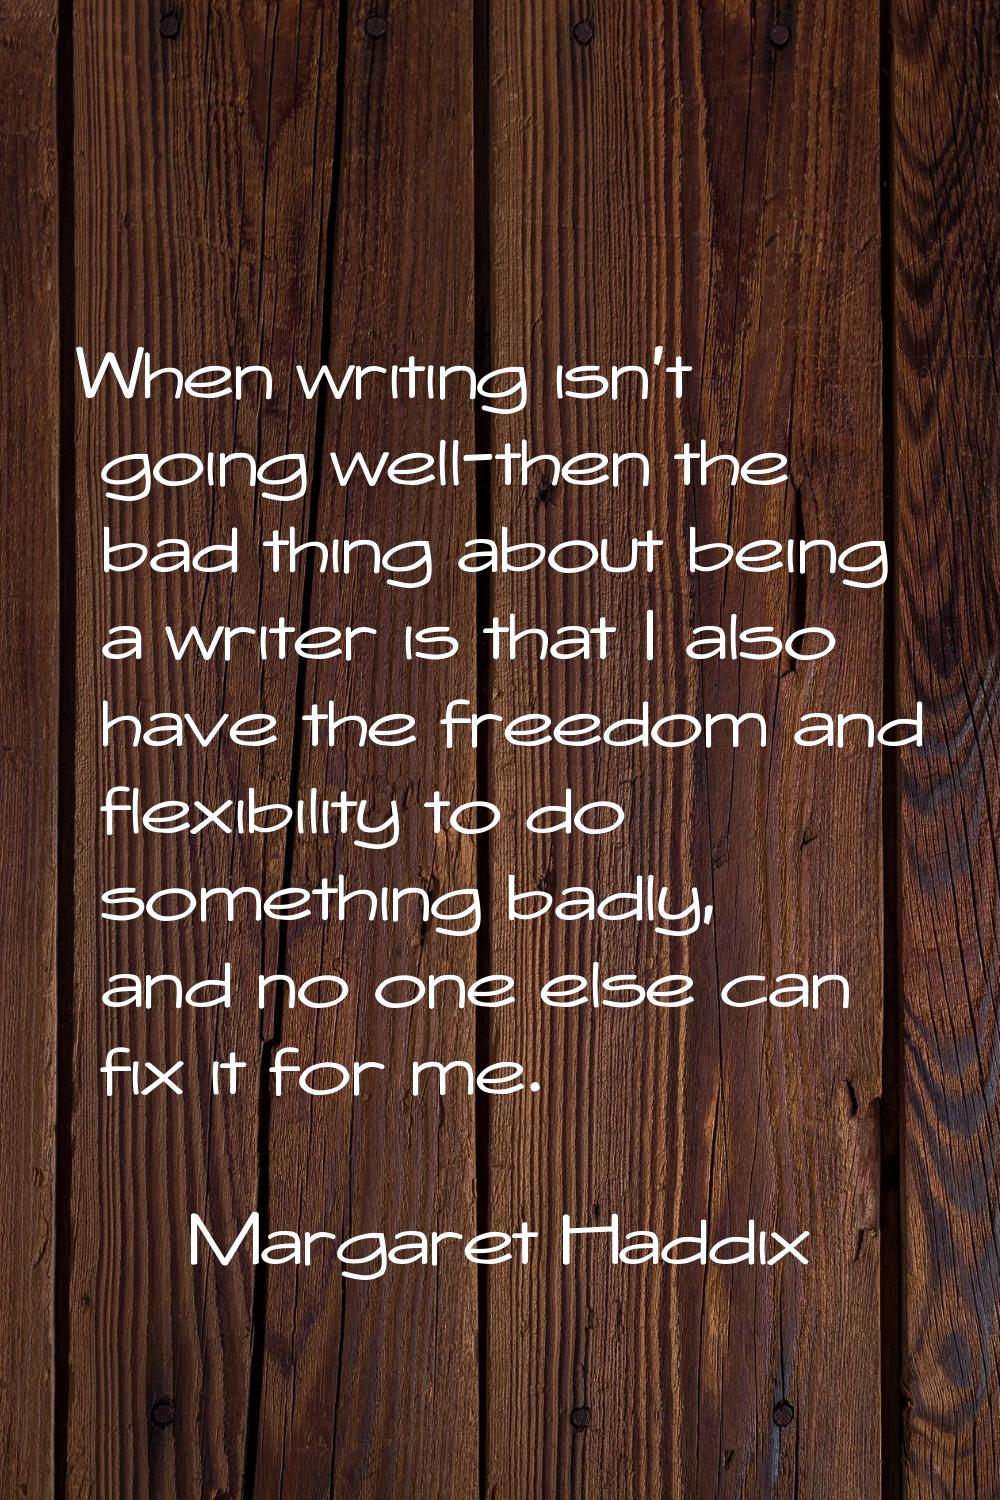 When writing isn't going well-then the bad thing about being a writer is that I also have the freed